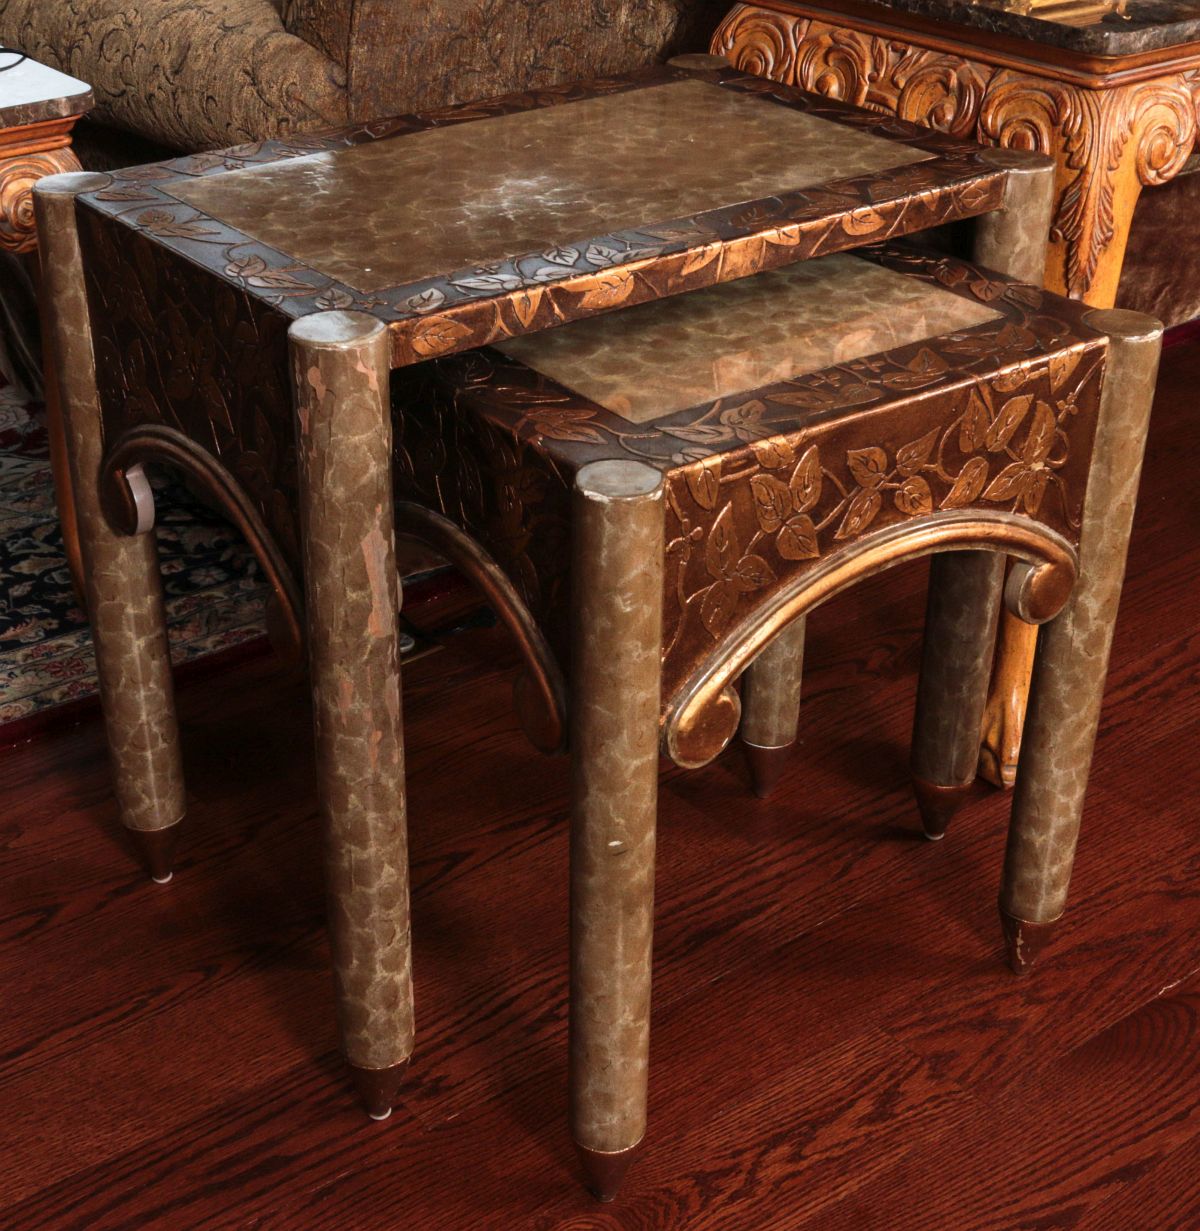 A PAIR OF DECORATIVE NESTING TABLES